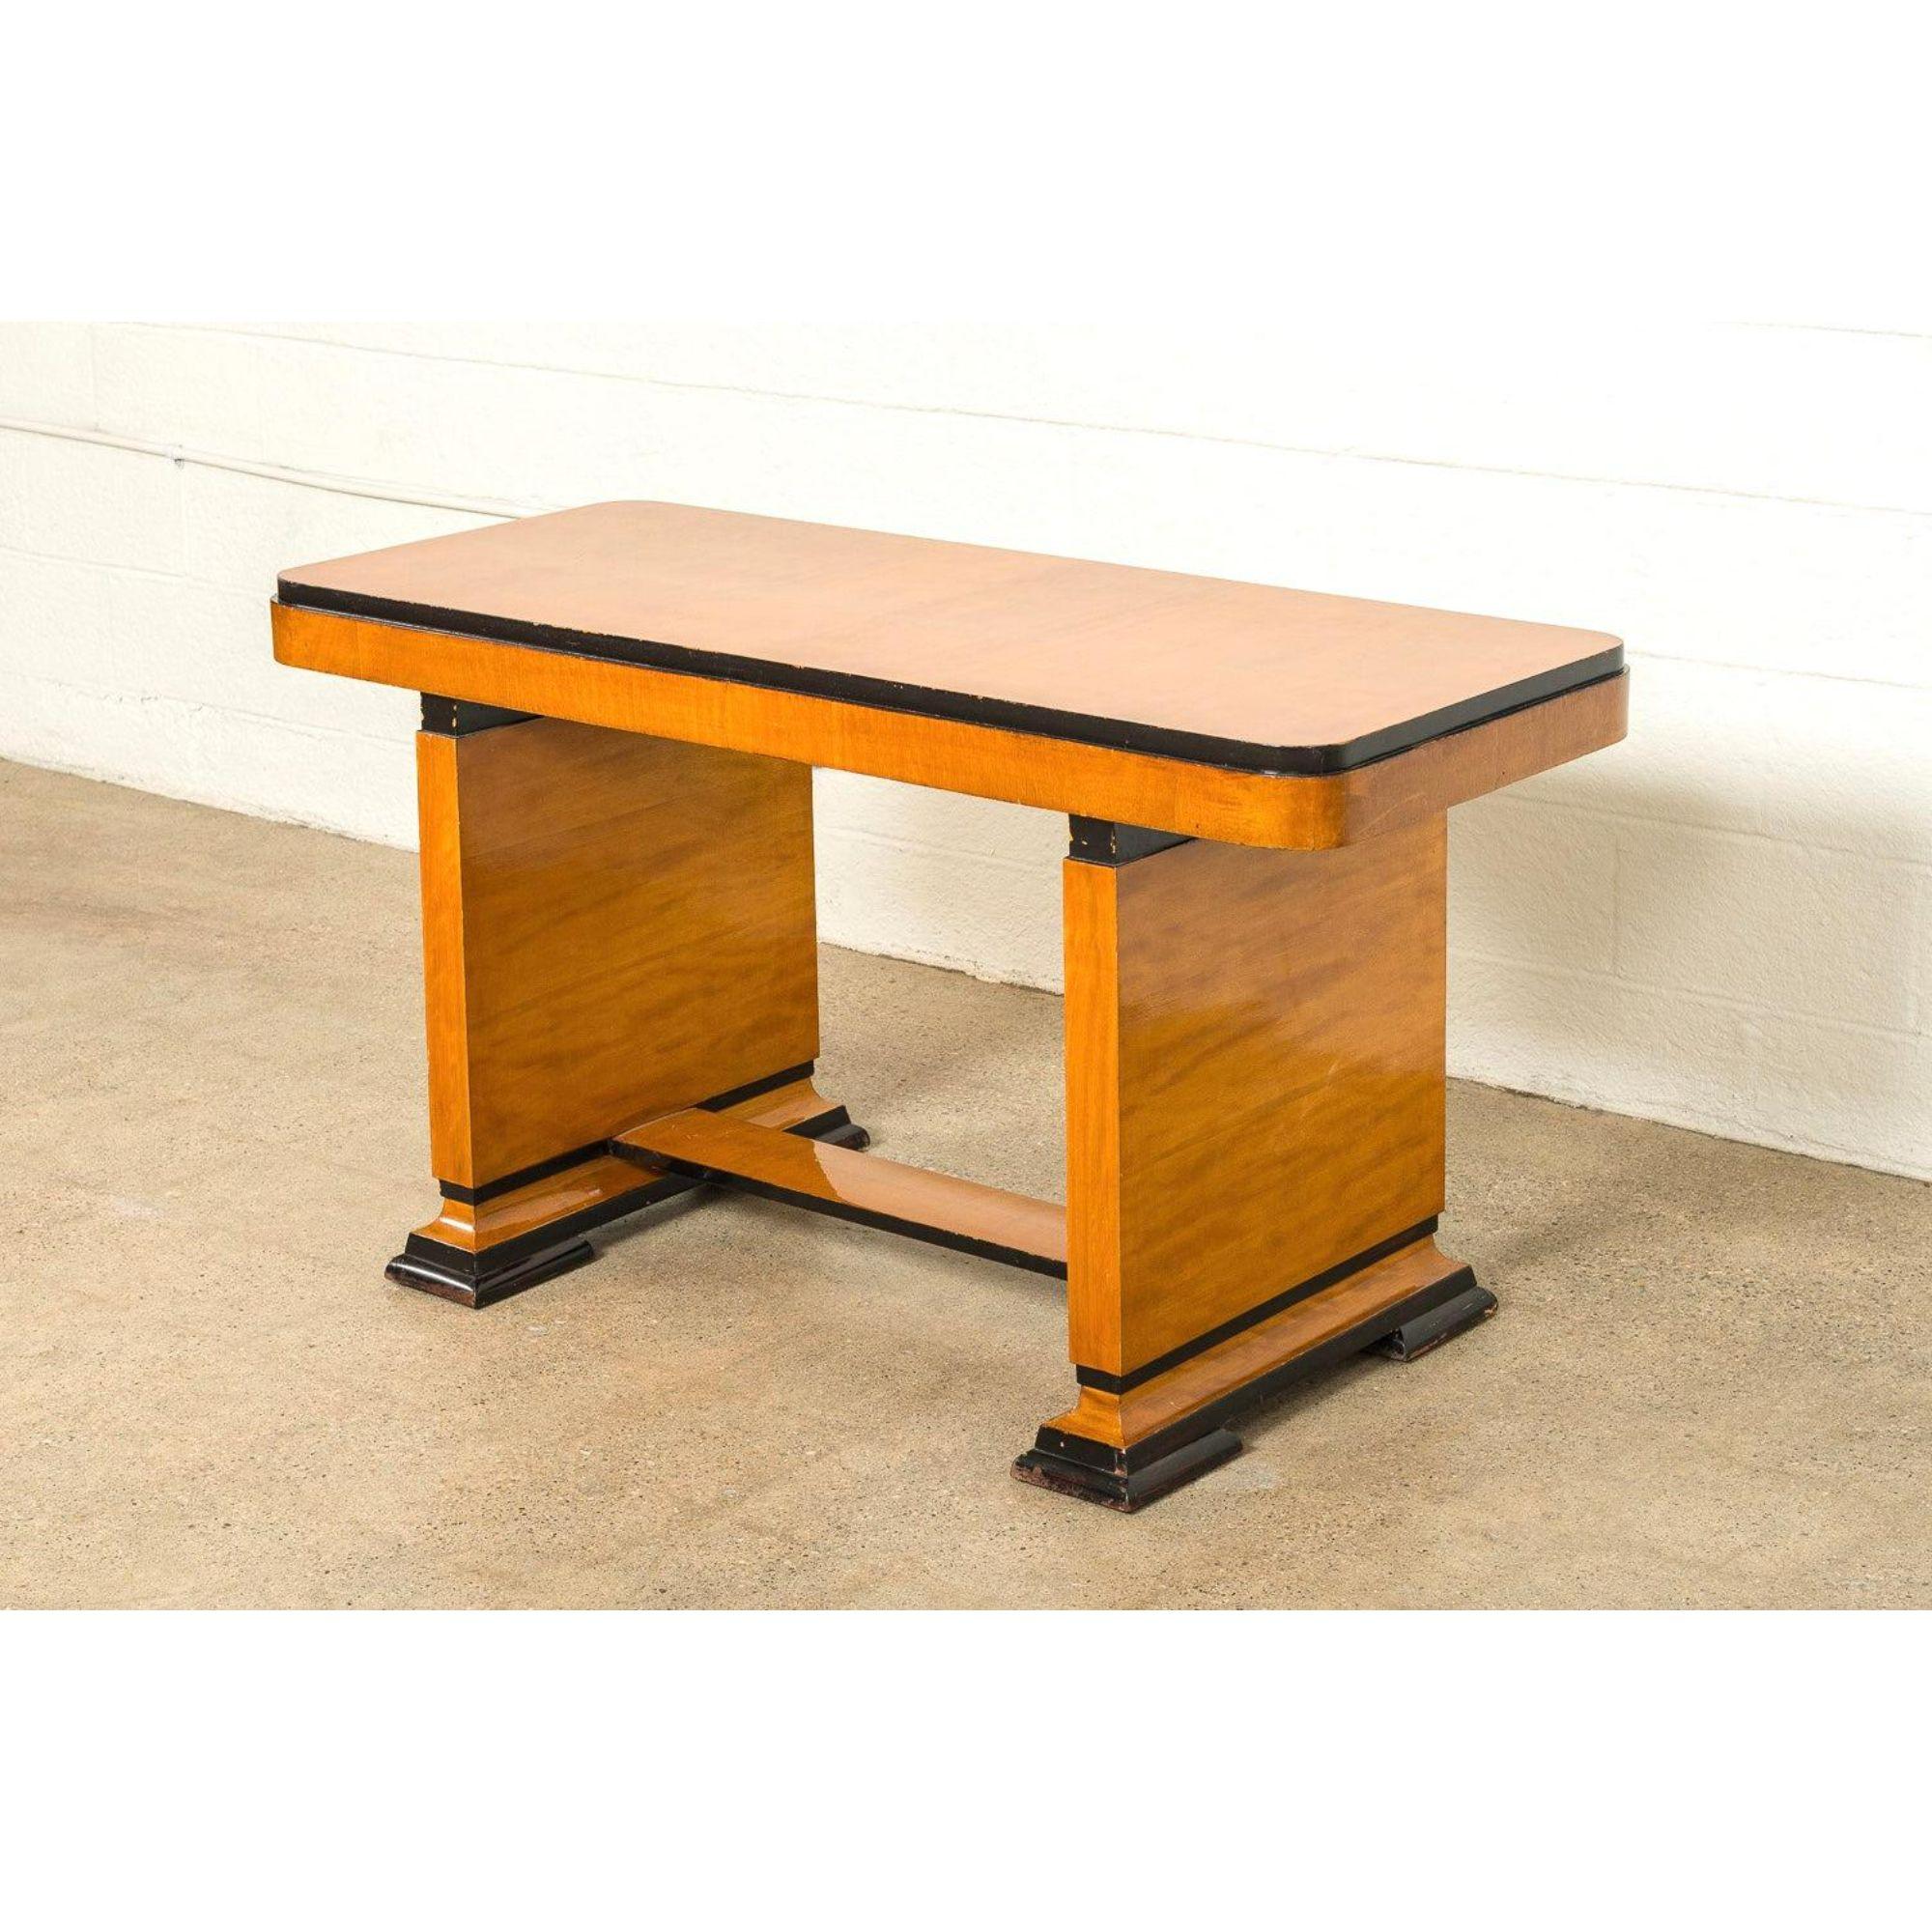 This lovely Art Deco table or writing desk circa 1930 is expertly handcrafted from maple wood and features a rectangular tabletop with curved edges and tall apron, a trestle base and ebonized accents.